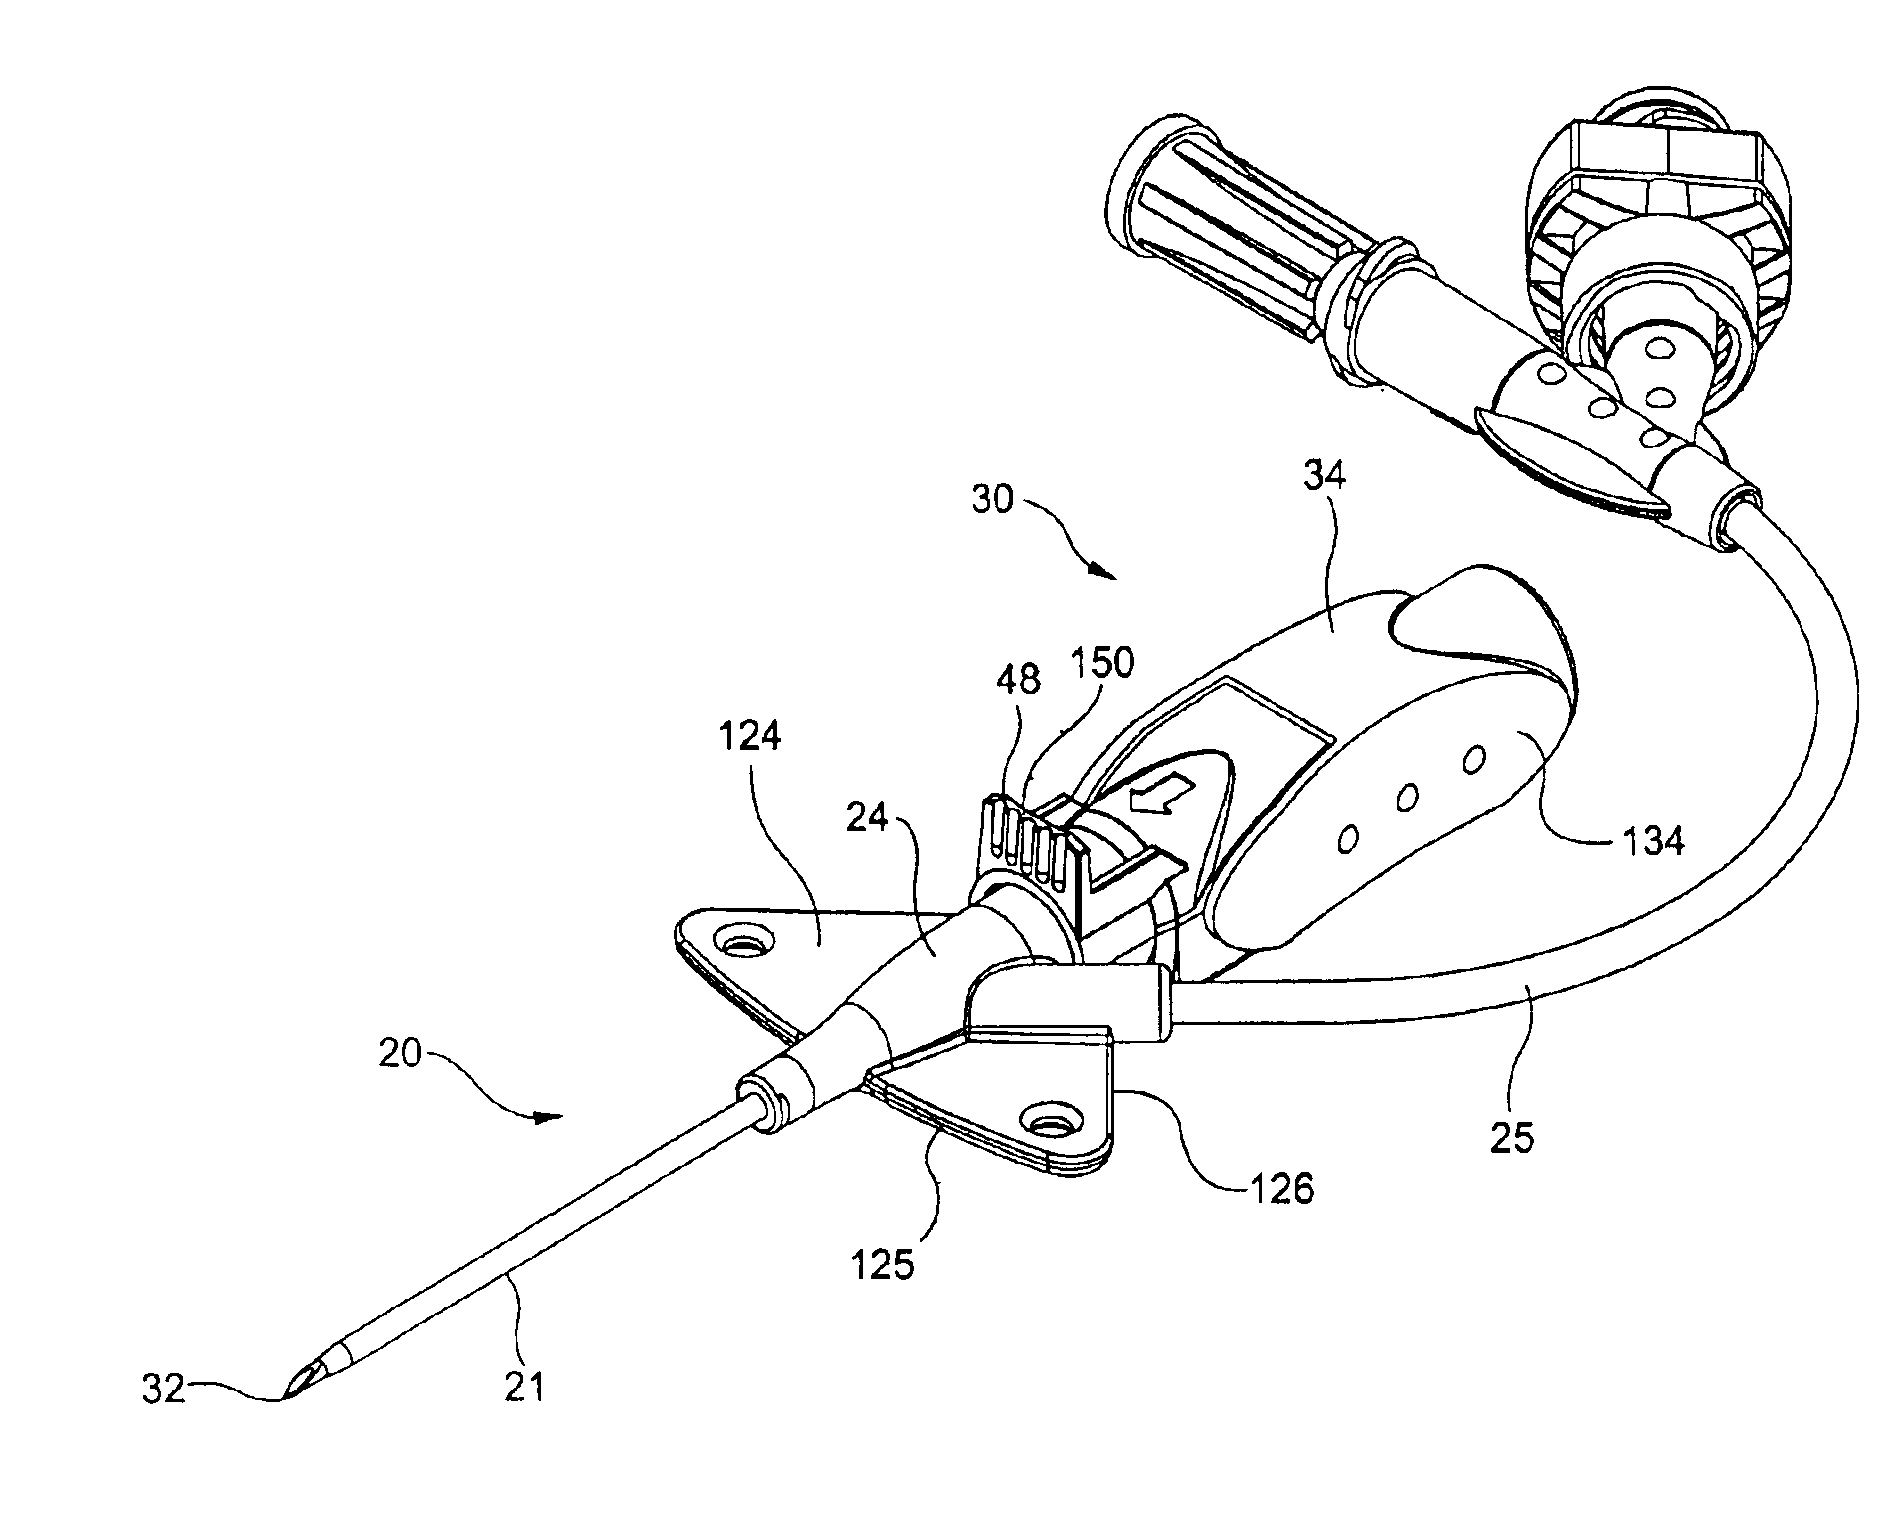 Cantilever push tab for an intravenous medical device